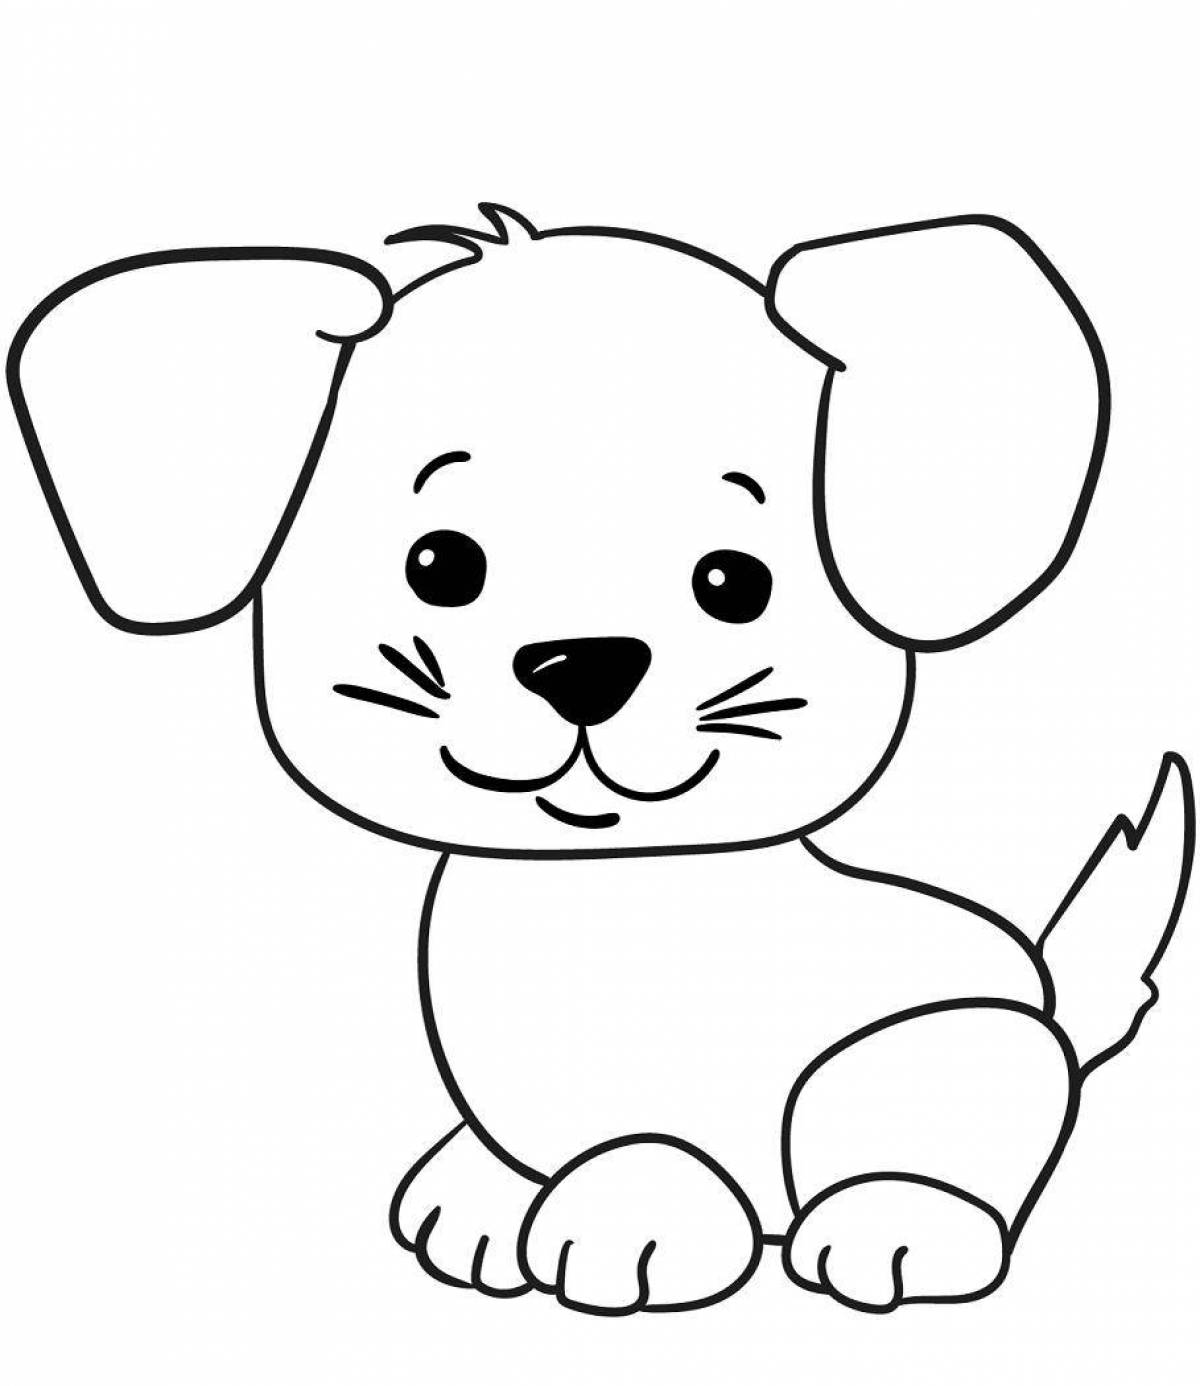 Attractive dog coloring book for 4-5 year olds